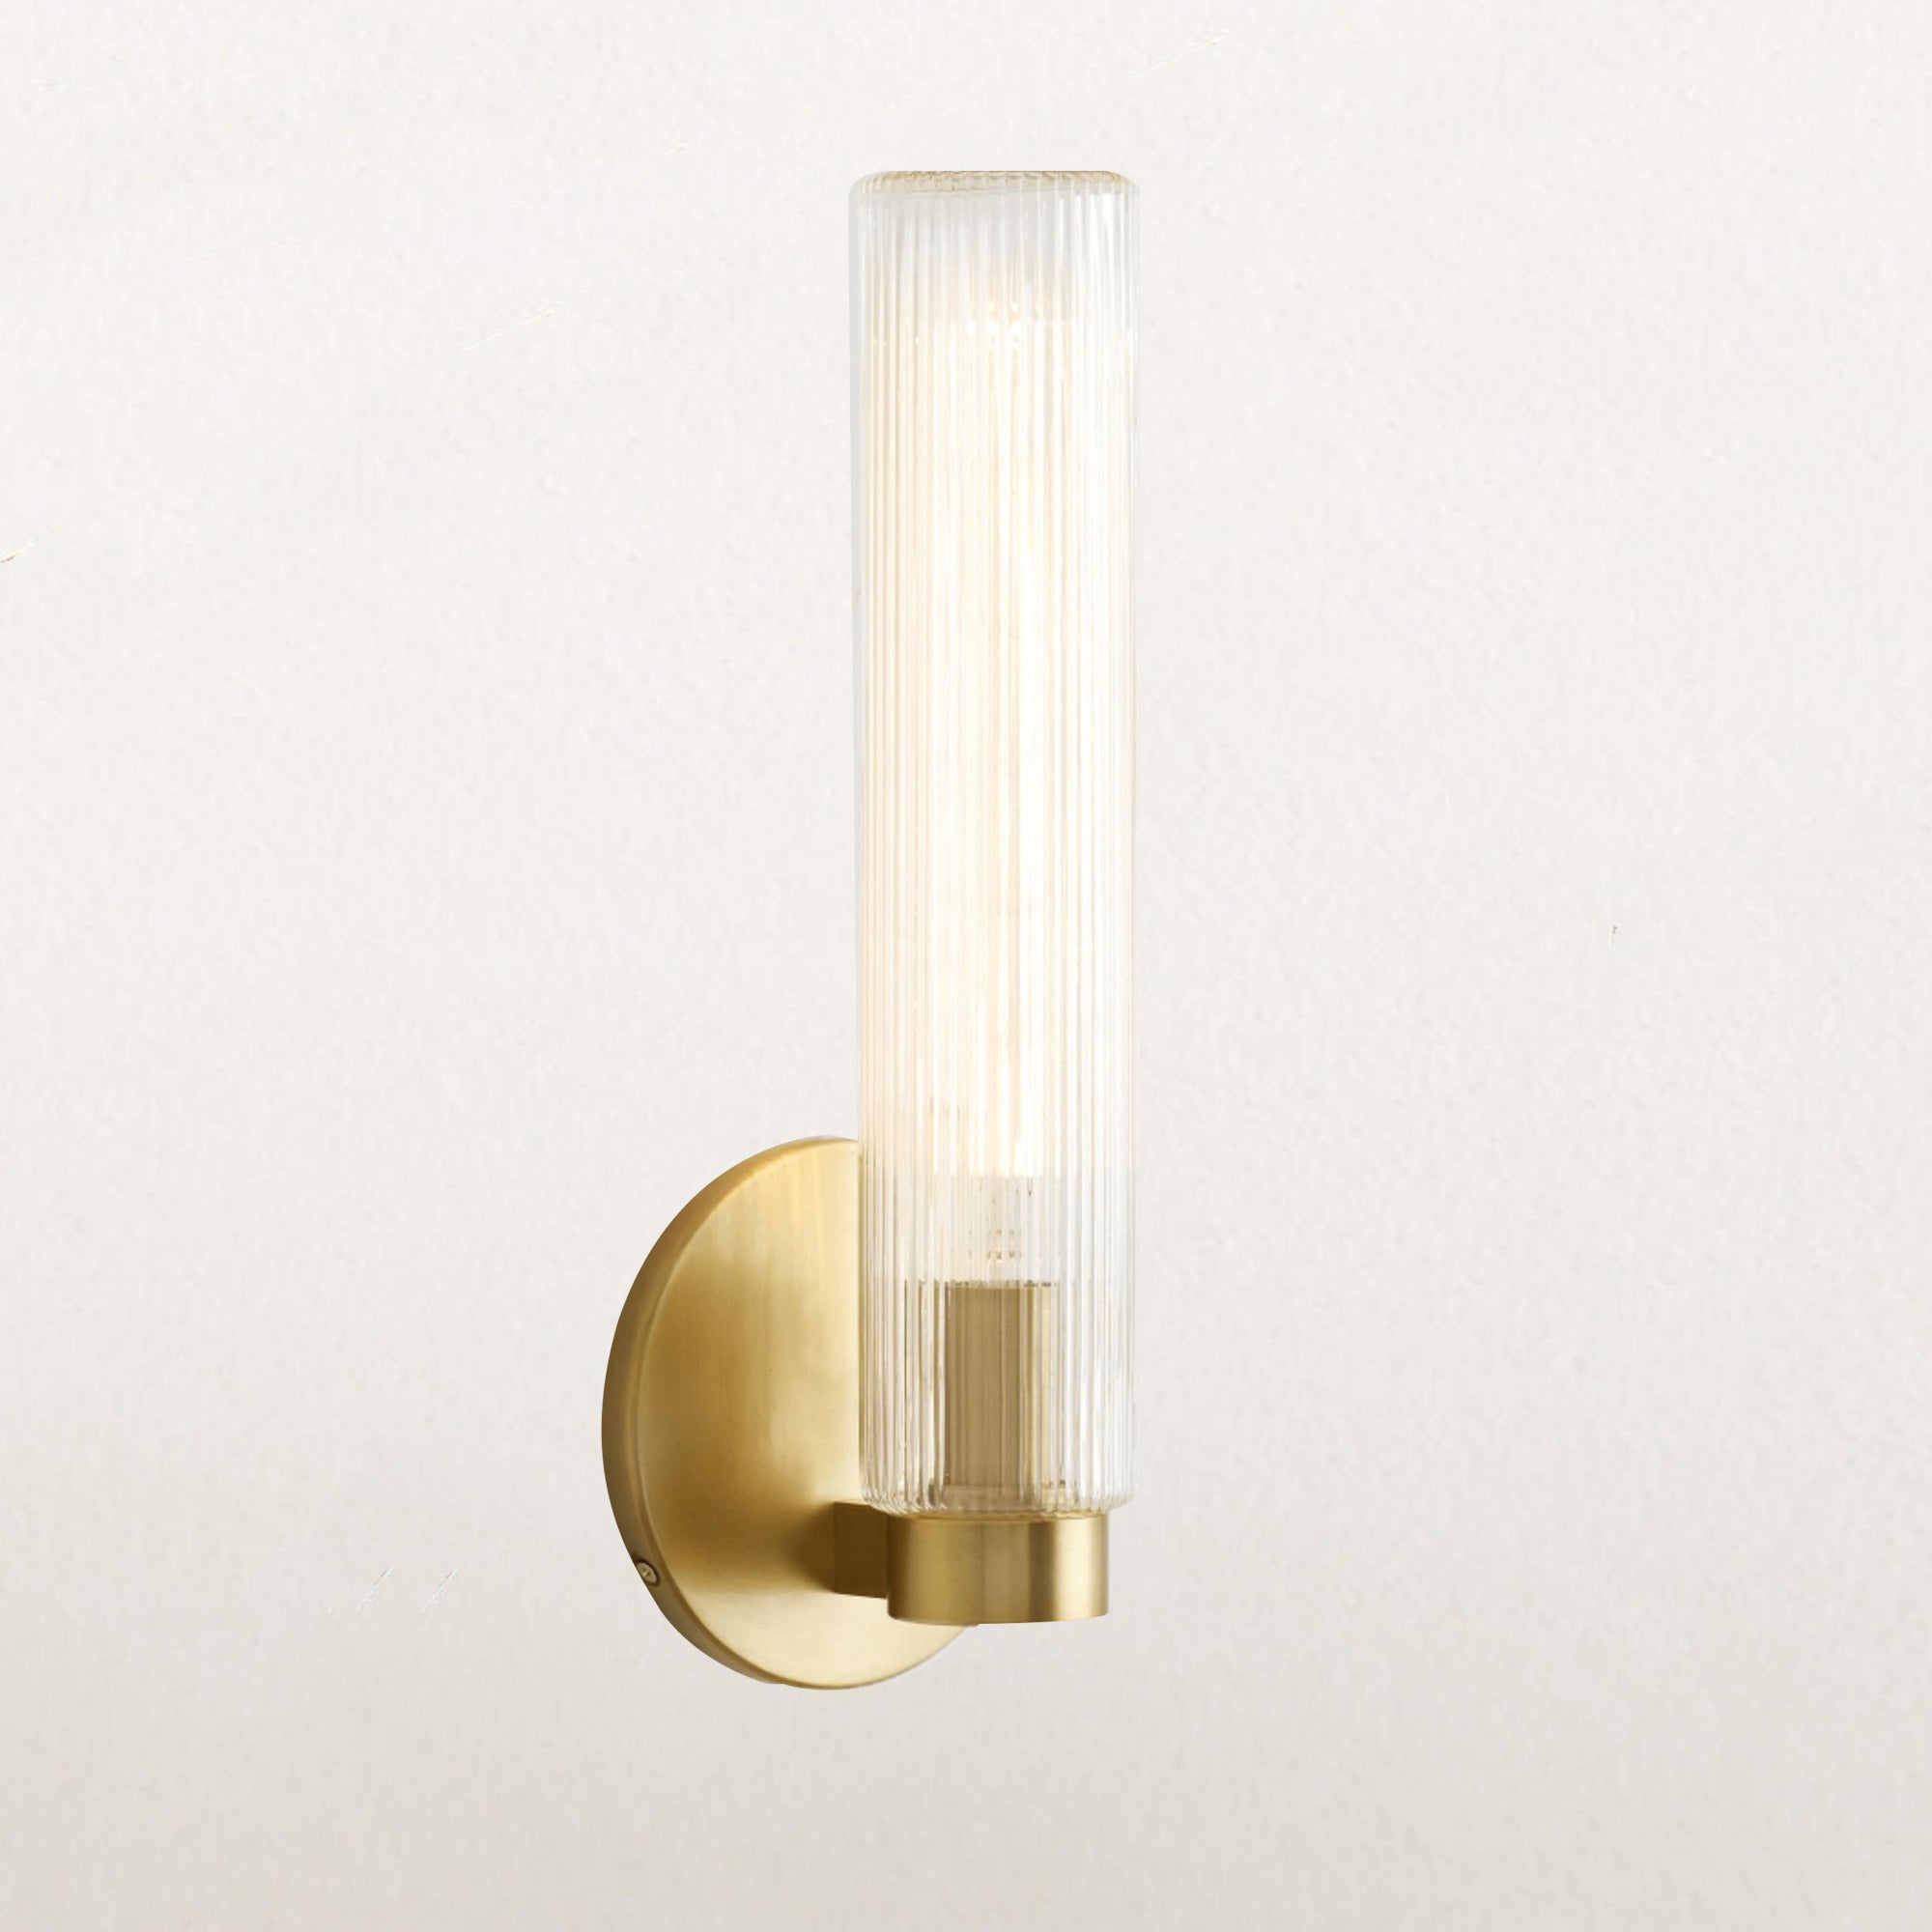 Radiant Fluted Glow Sconce - Elegant Bathroom Wall Lights with Fluted Glass Shade